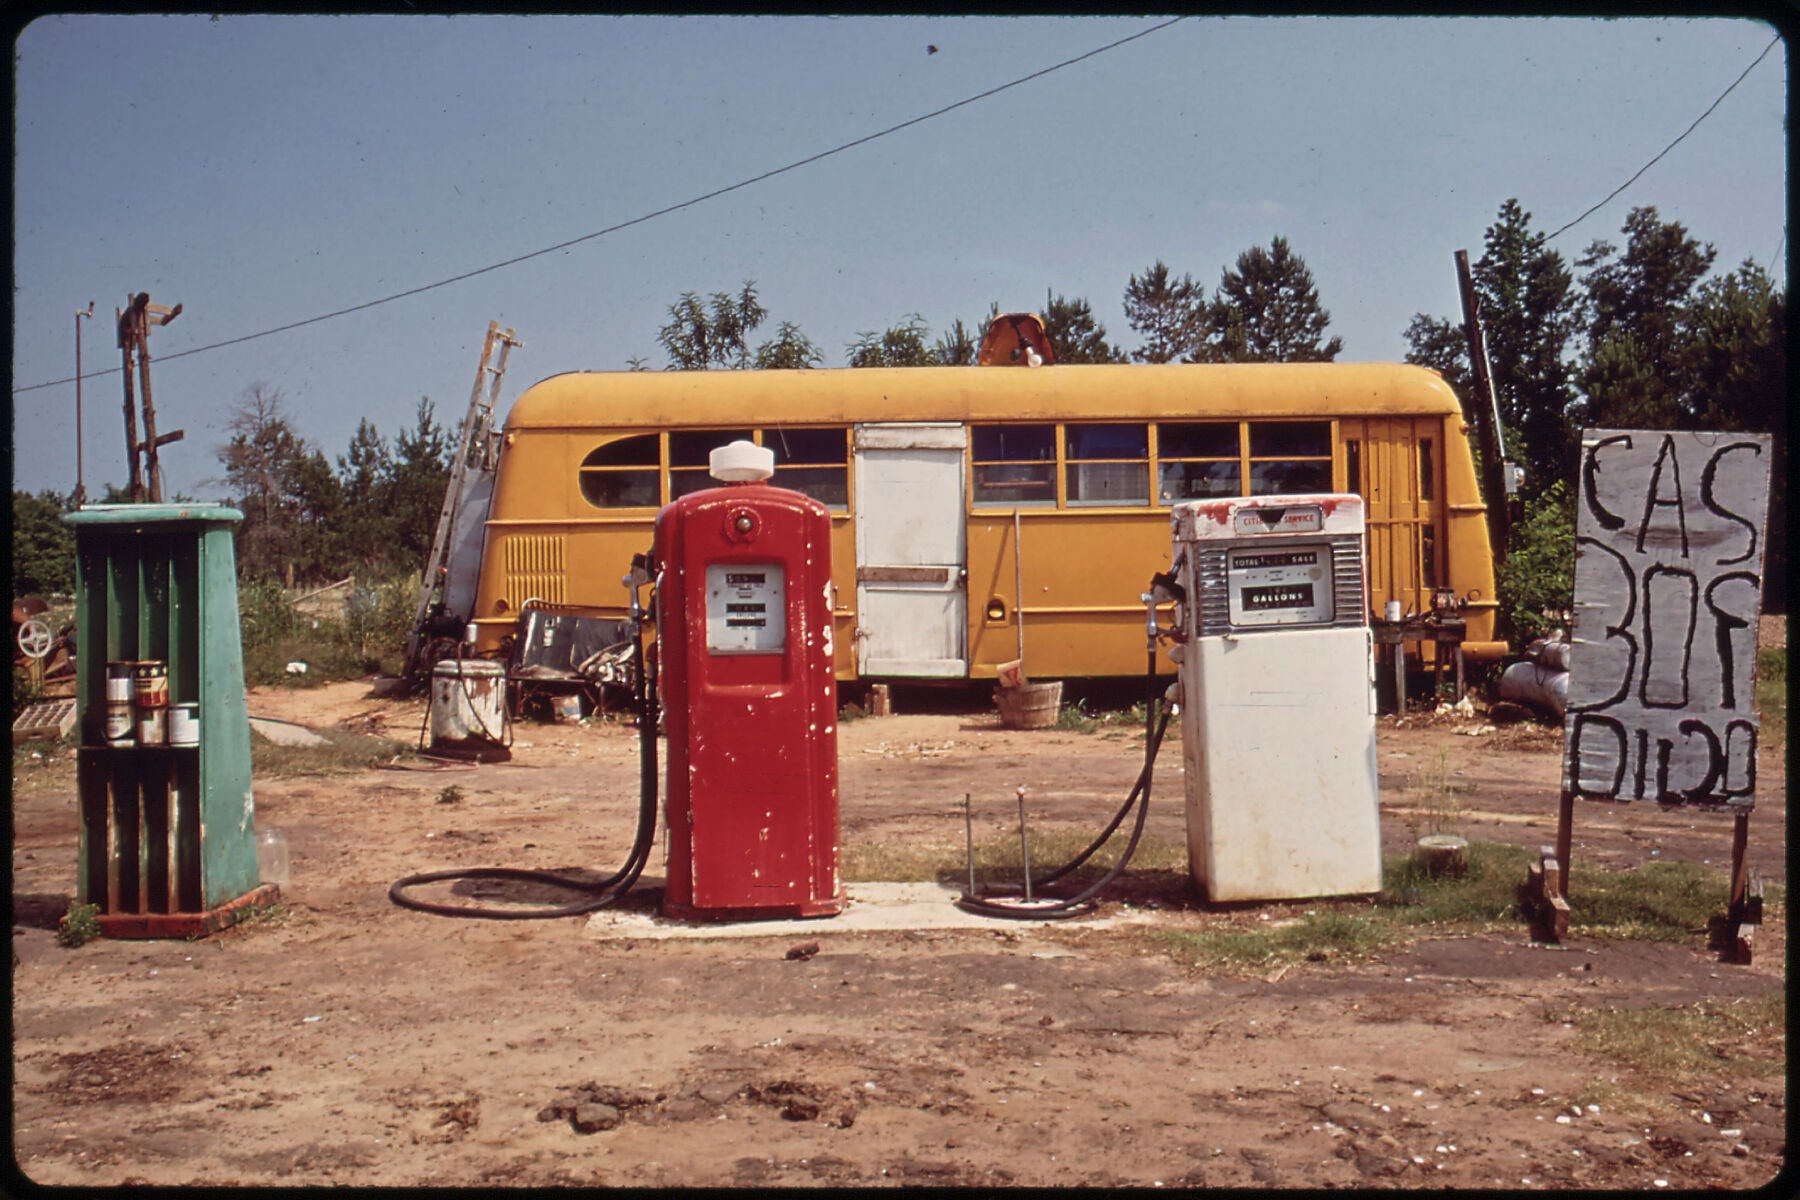 Cut-Rate Gas Station Operates Out of Bus by Marc St. Gil - June 1972 